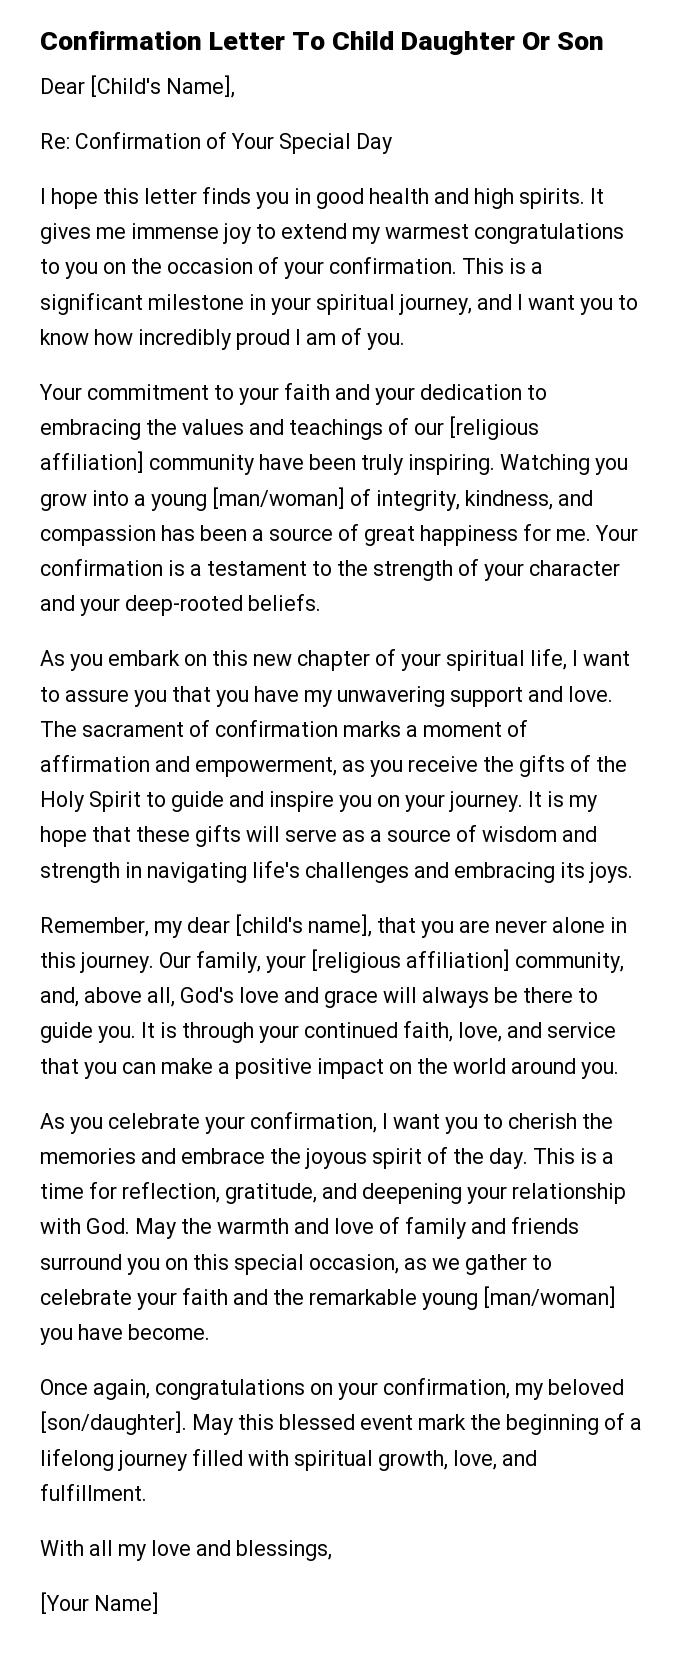 Confirmation Letter To Child Daughter Or Son